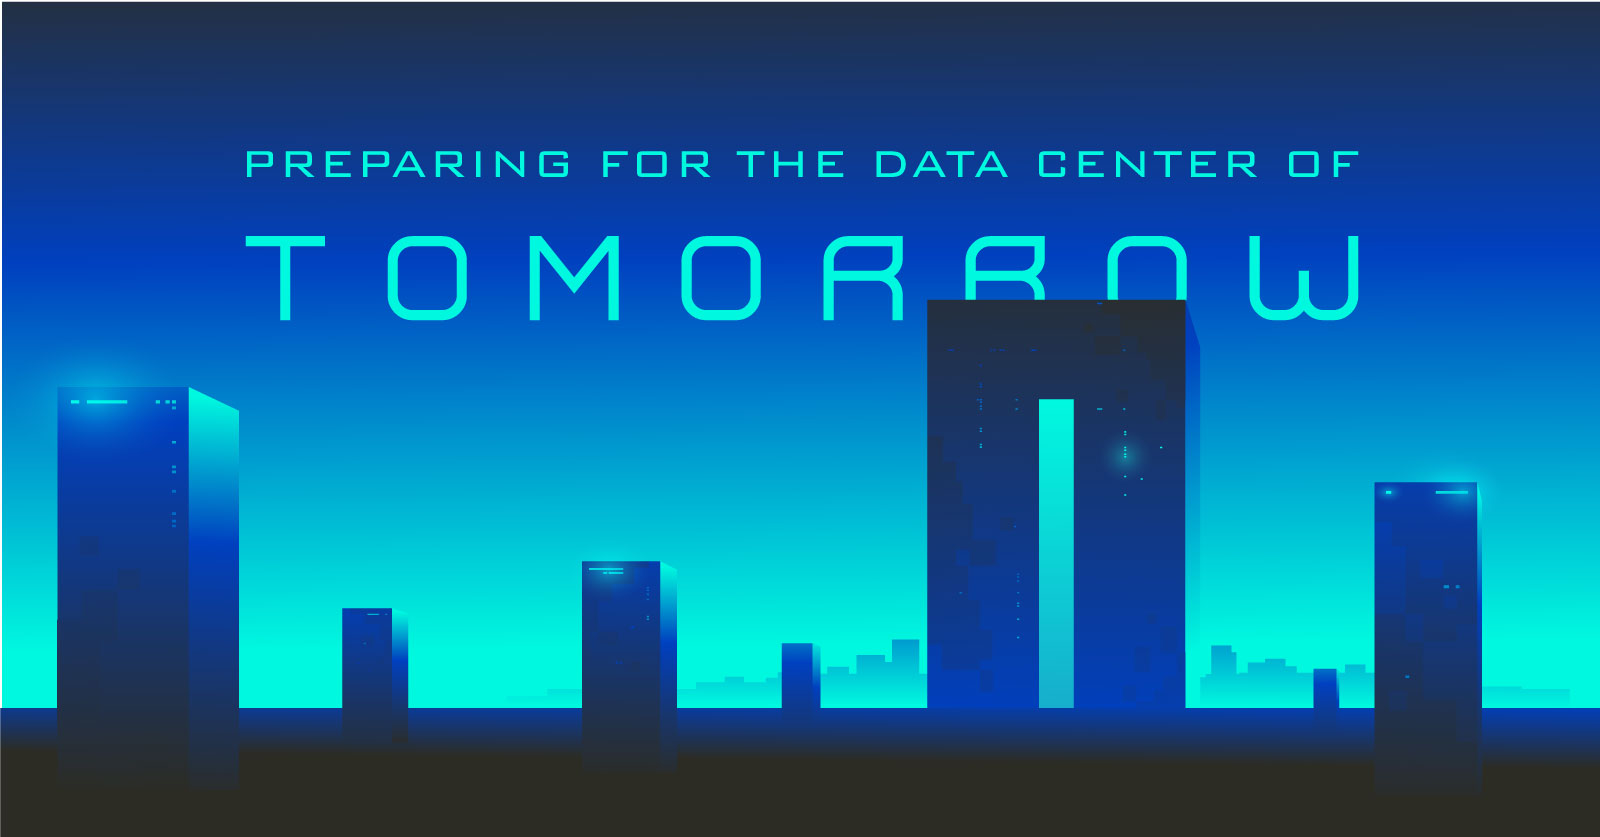 Preparing for the data center of tomorrow